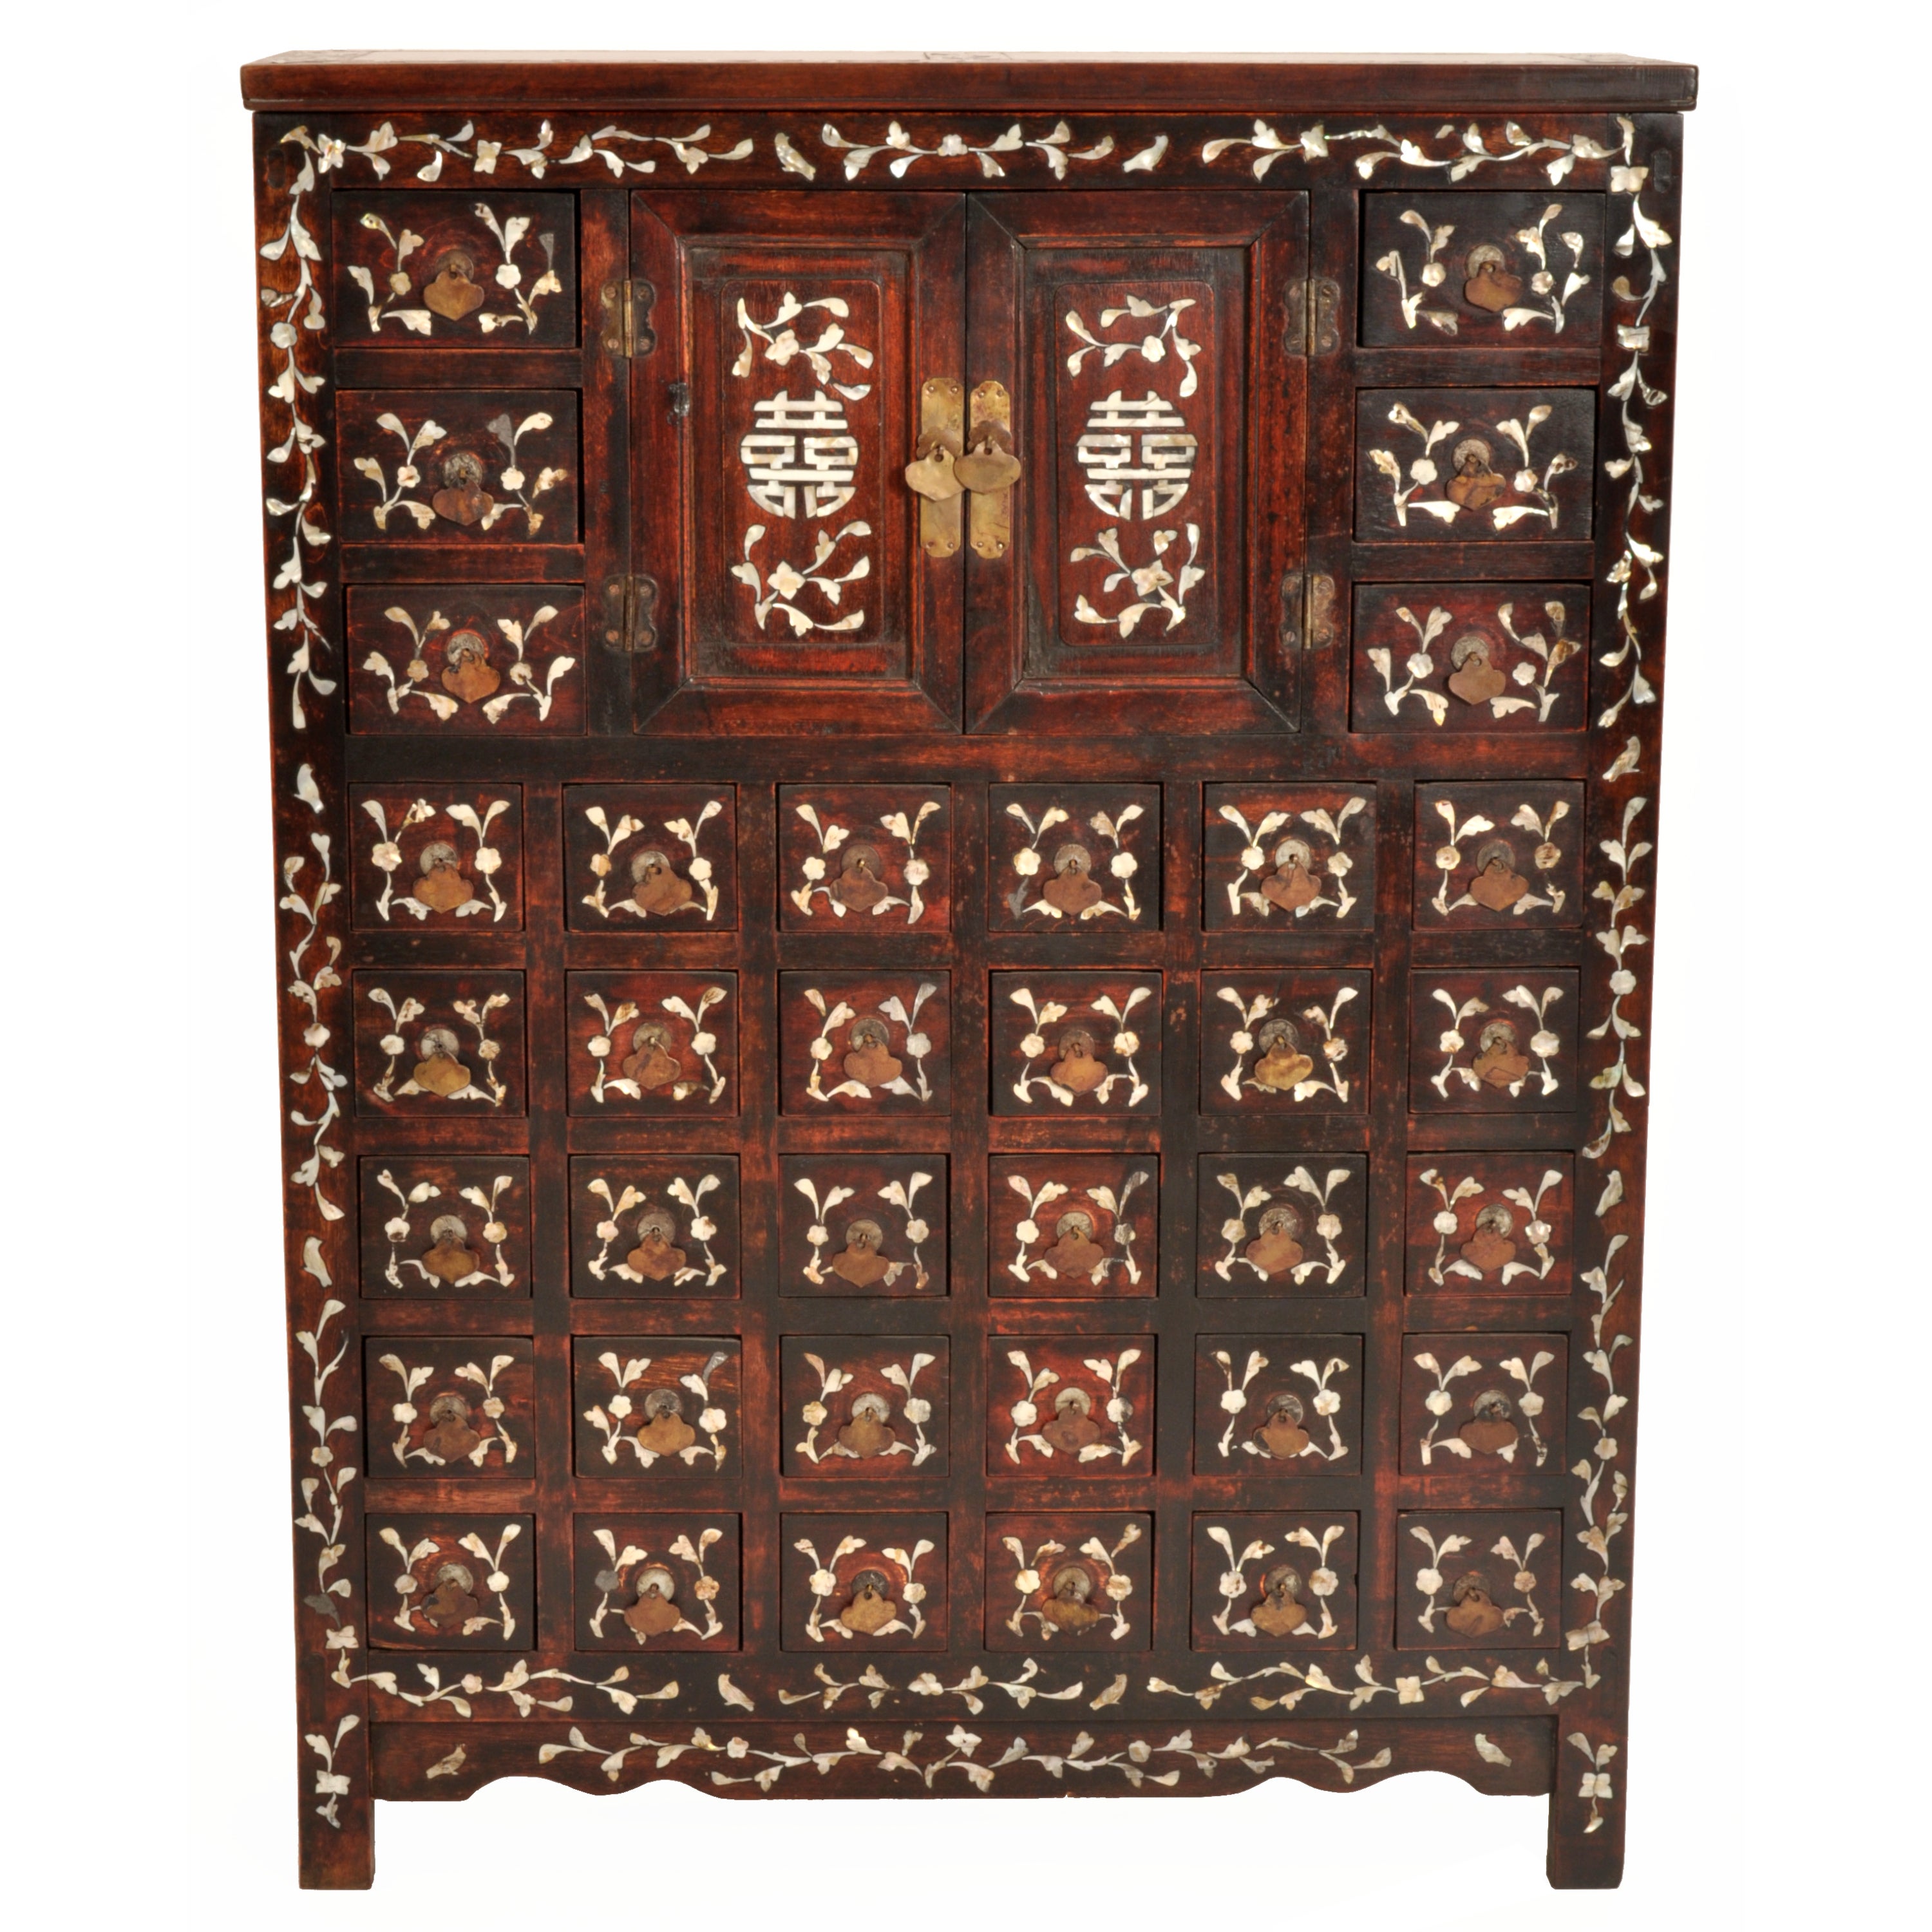 A fine & rare antique Chinese Qing dynasty rosewood and Mother-of-Pearl inlaid apothecary cabinet, circa 1850.
The cabinet having a hinged top inset with two dark marble panels and enclosing a shallow storage area, the outside of the cabinet is